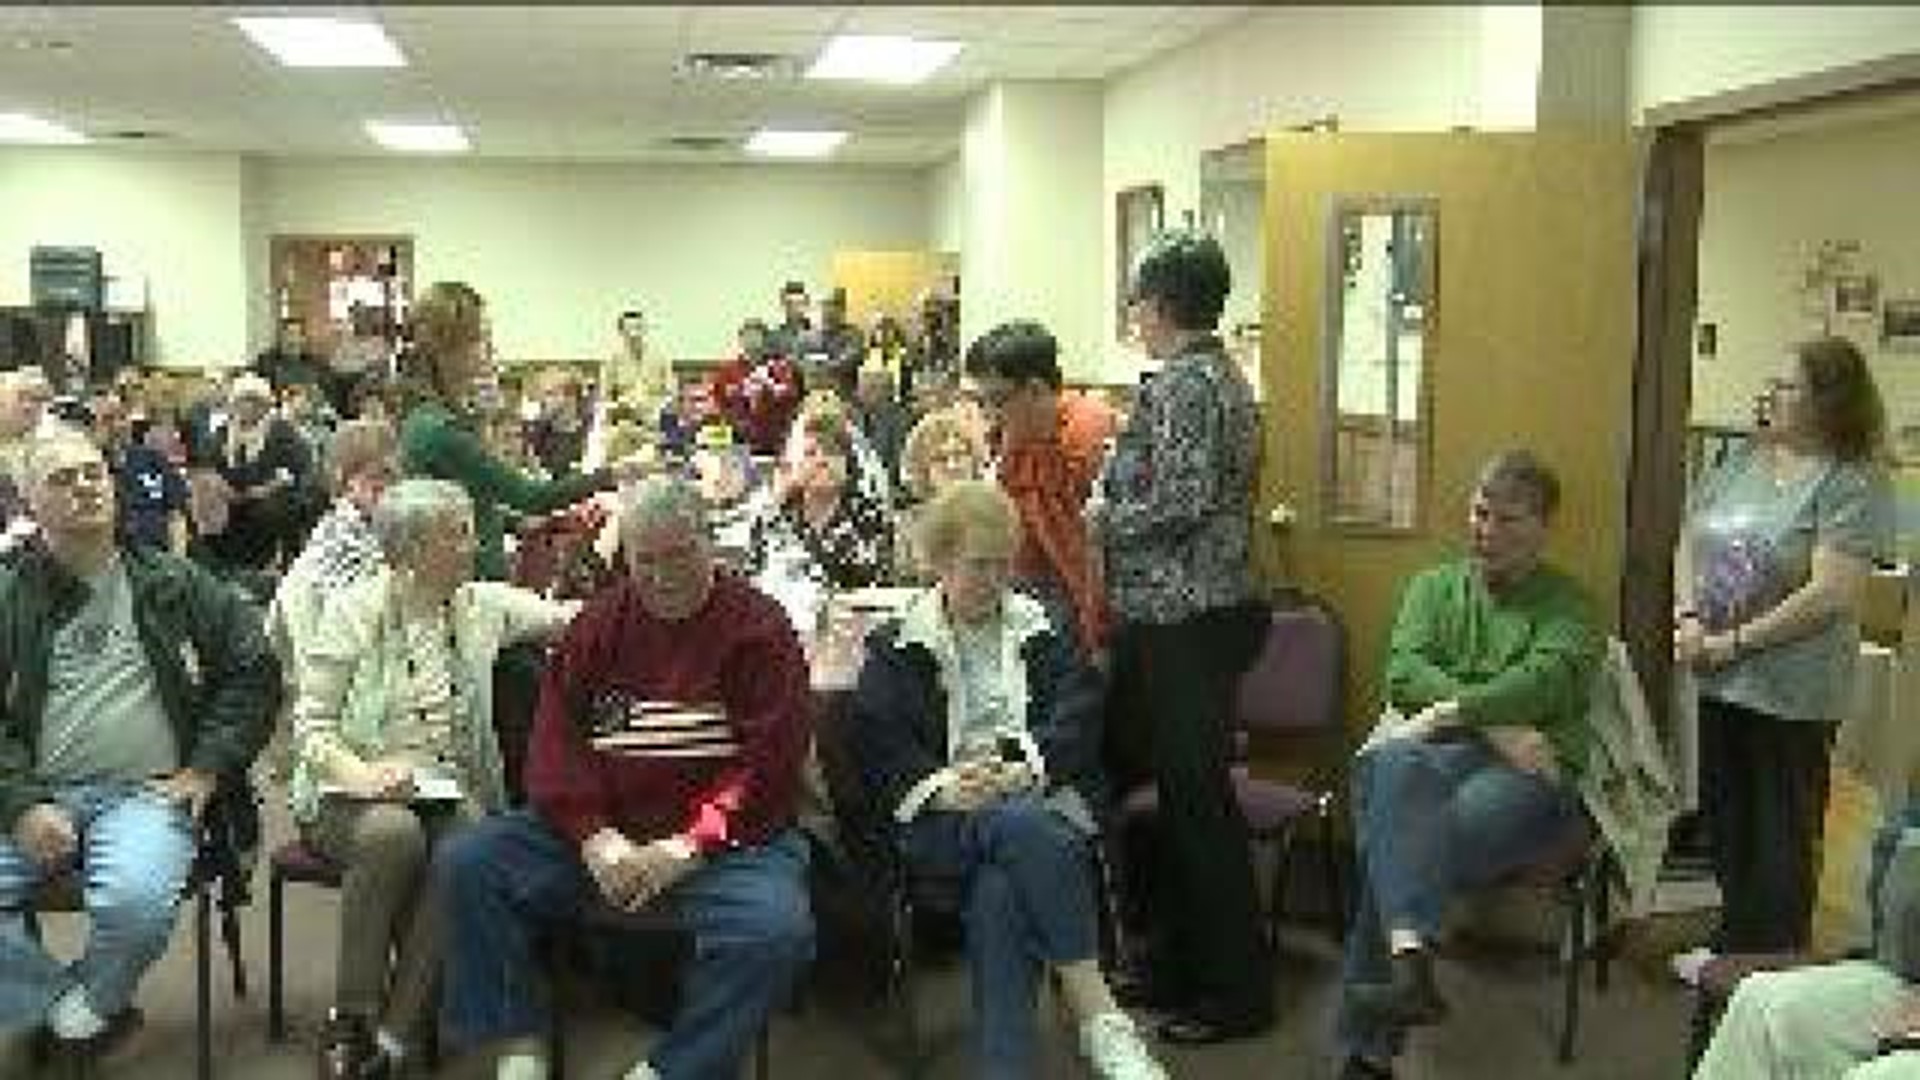 County Officials Discuss Options With U.R.S. Clients